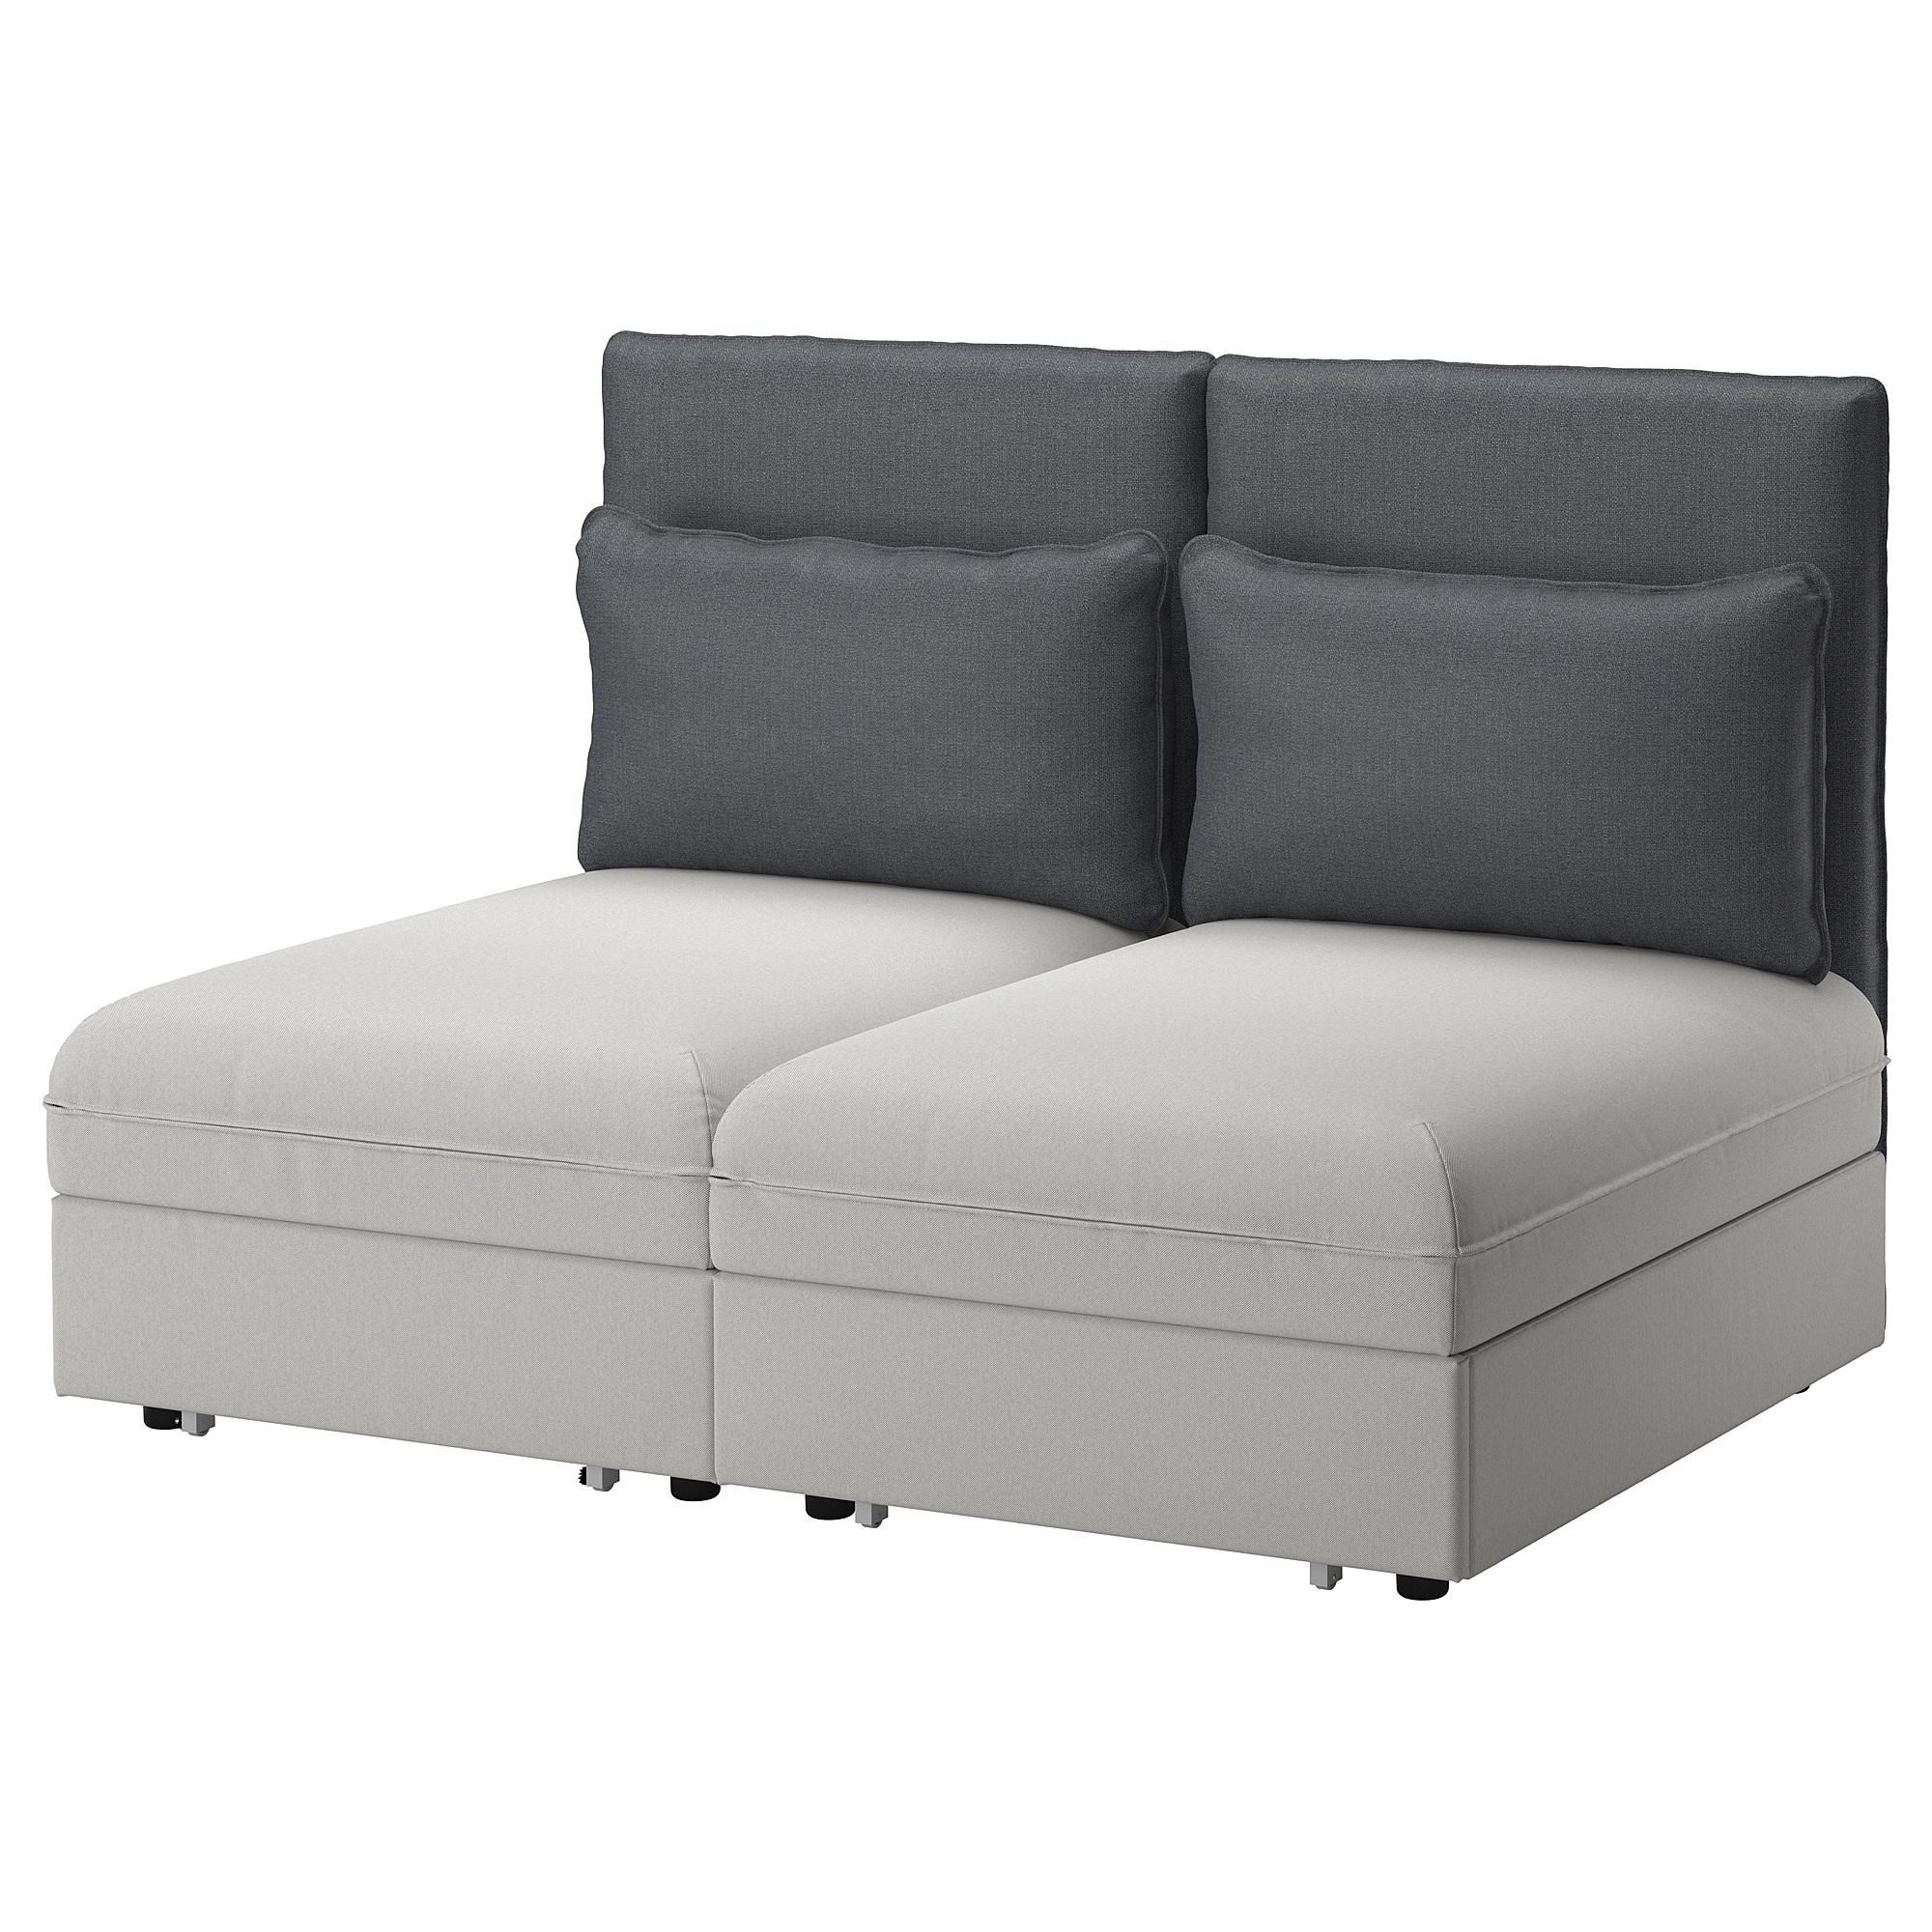 Sofa Beds & Futons – Ikea Within Mini Sofa Beds (View 10 of 20)